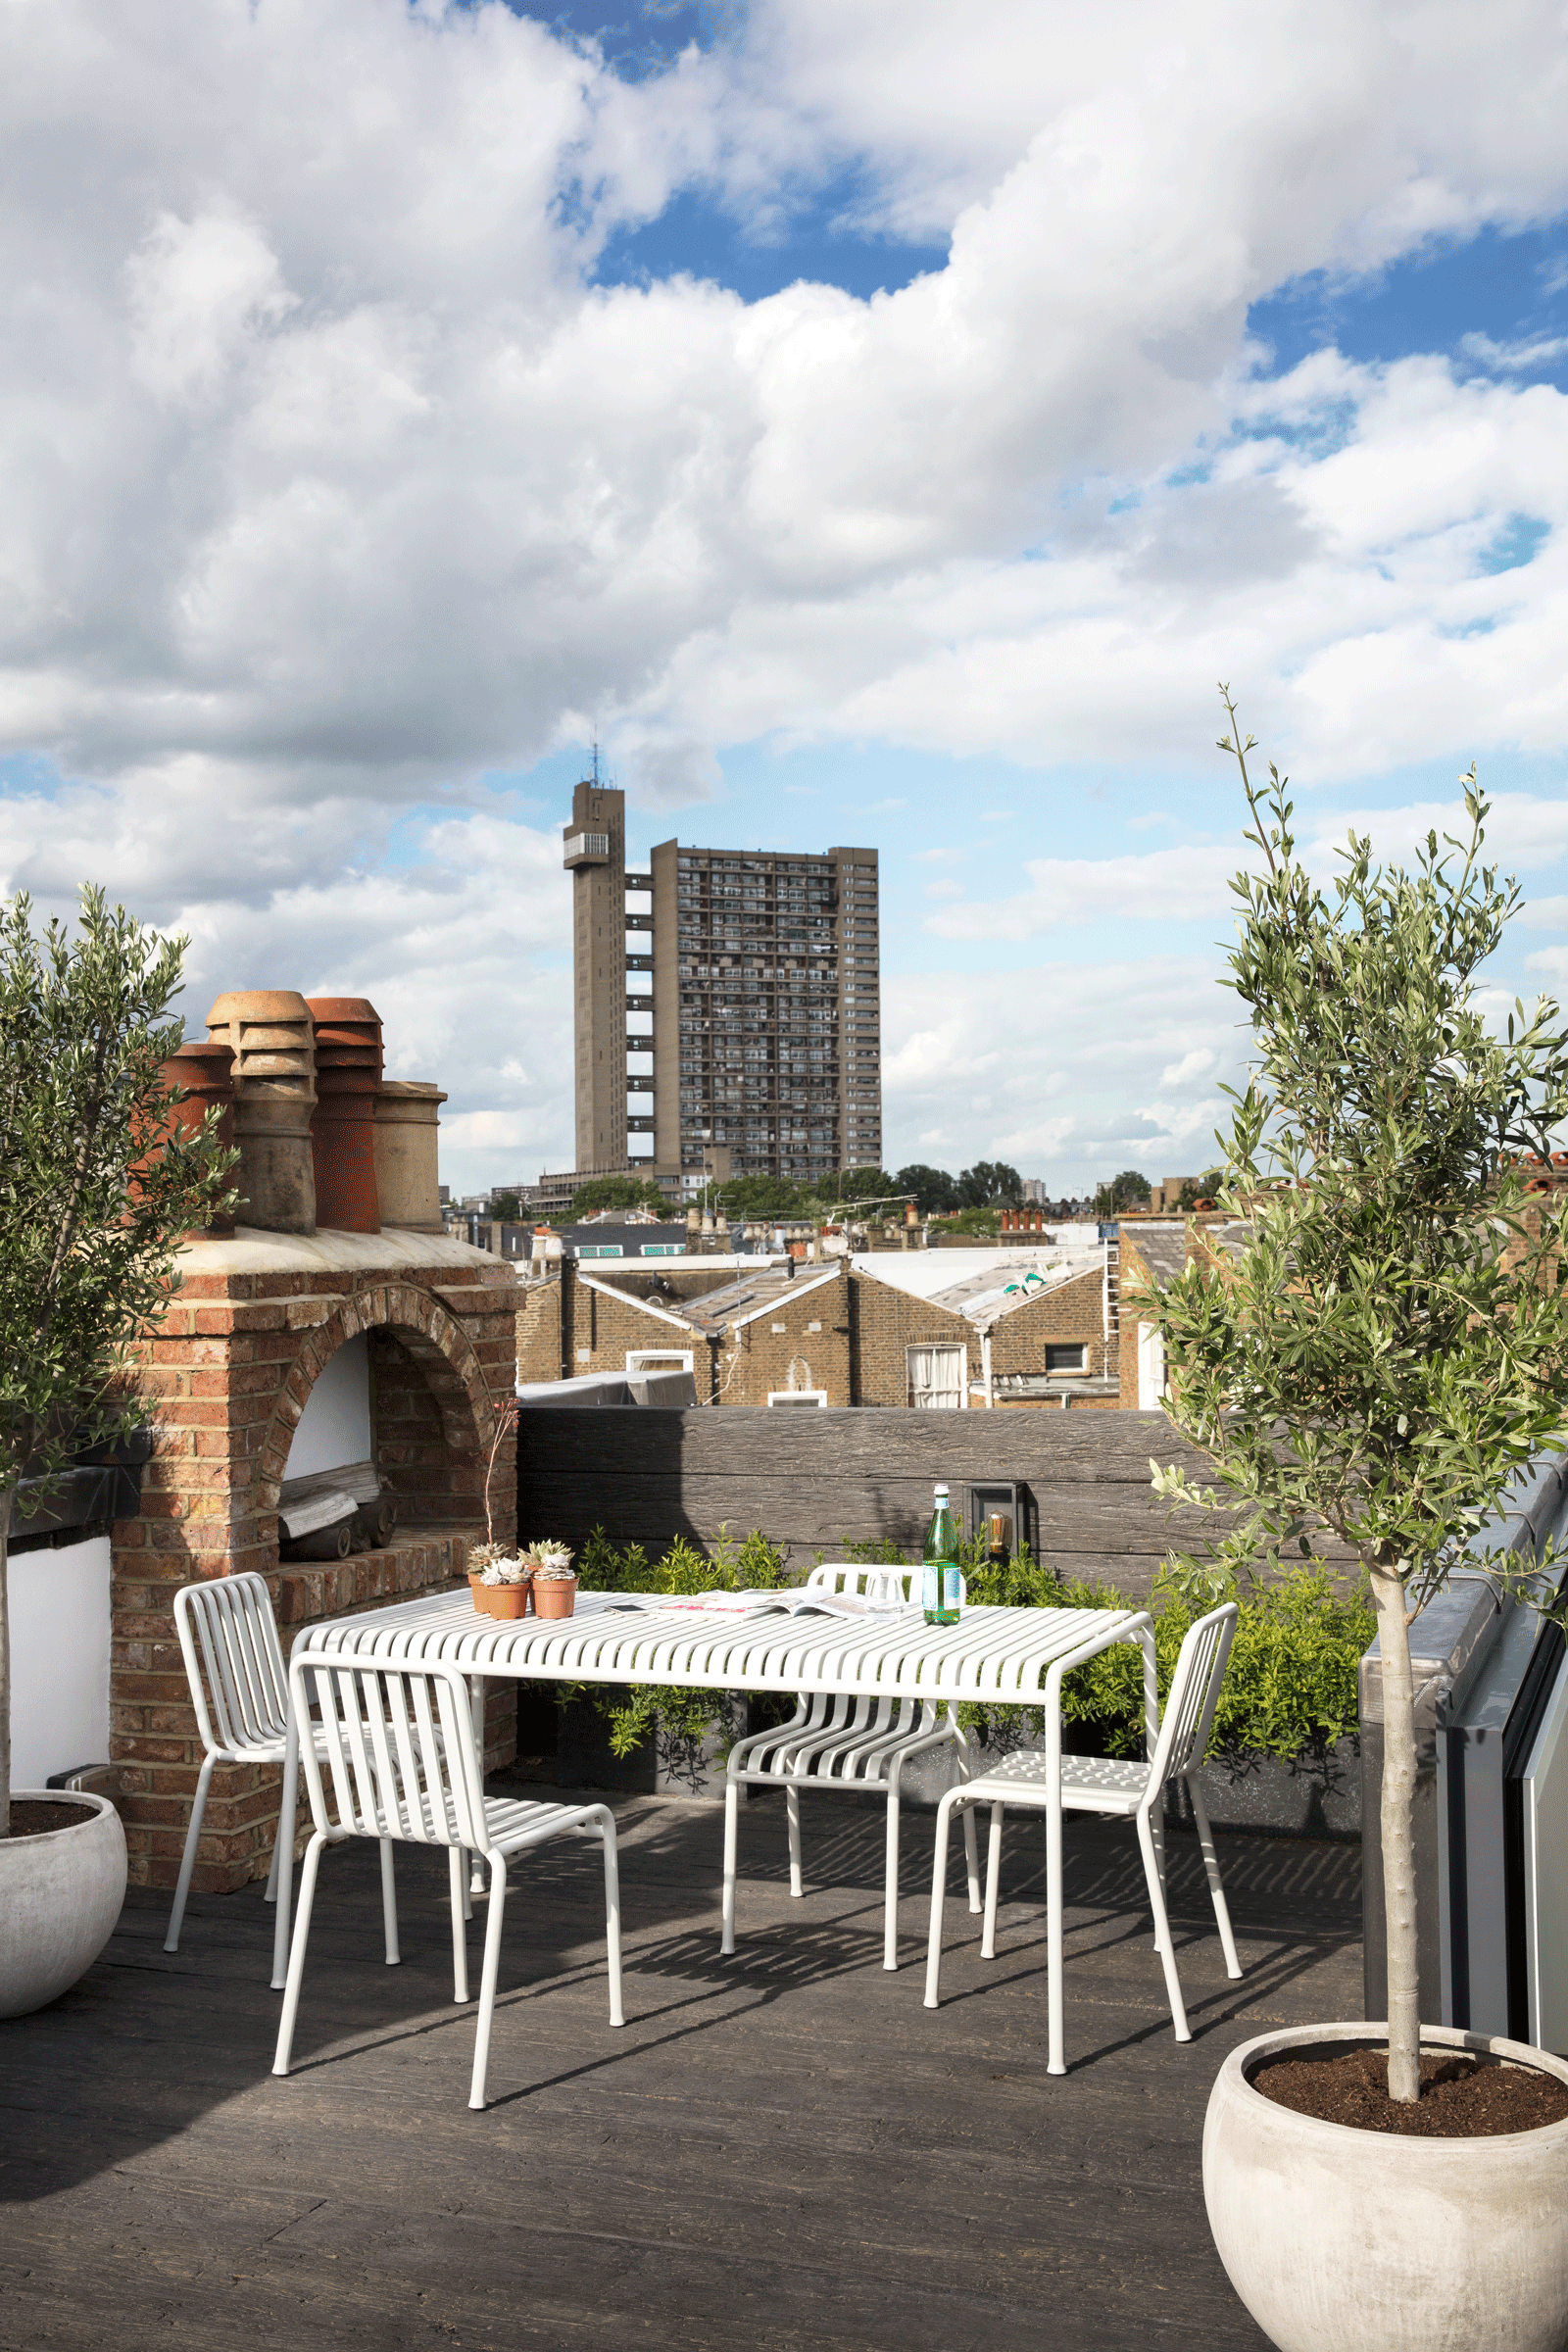 roof garden ideas with a pizza oven